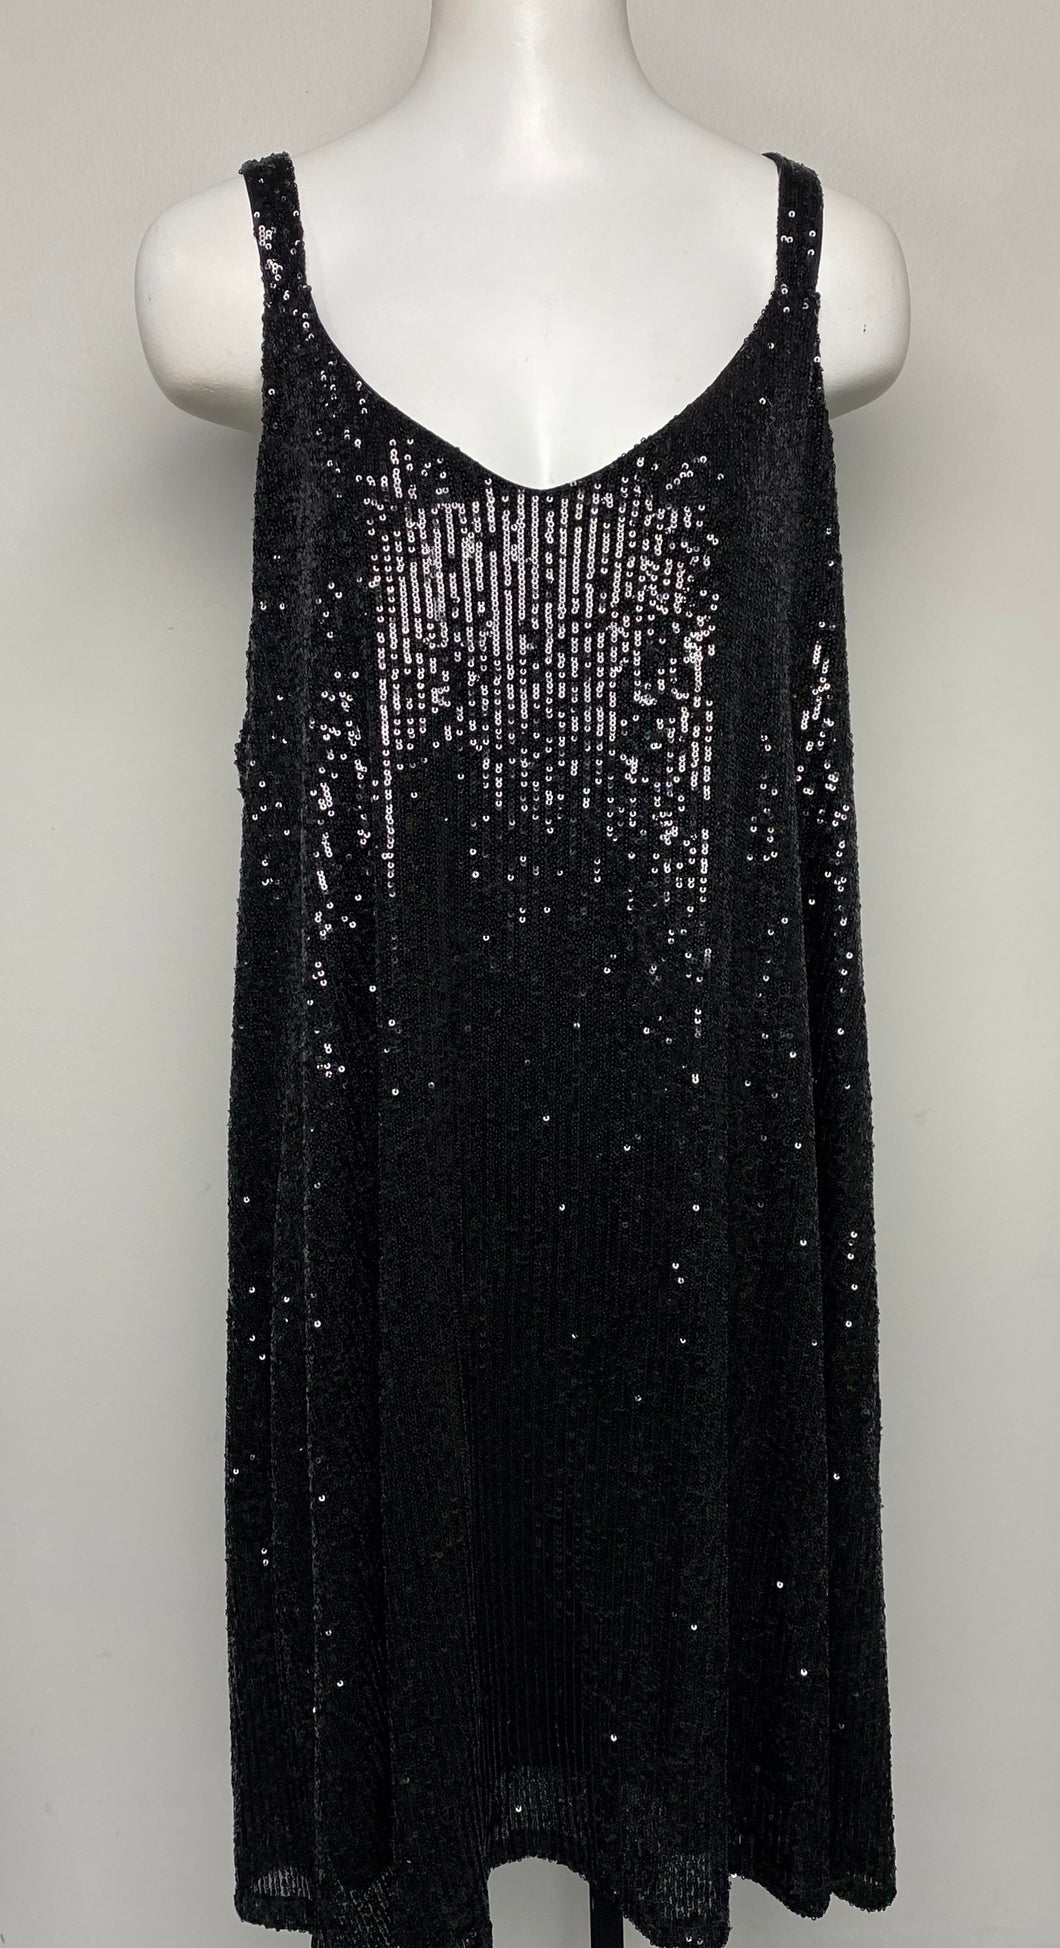 Maurices Black Sequin Dress NEW!- (3X)